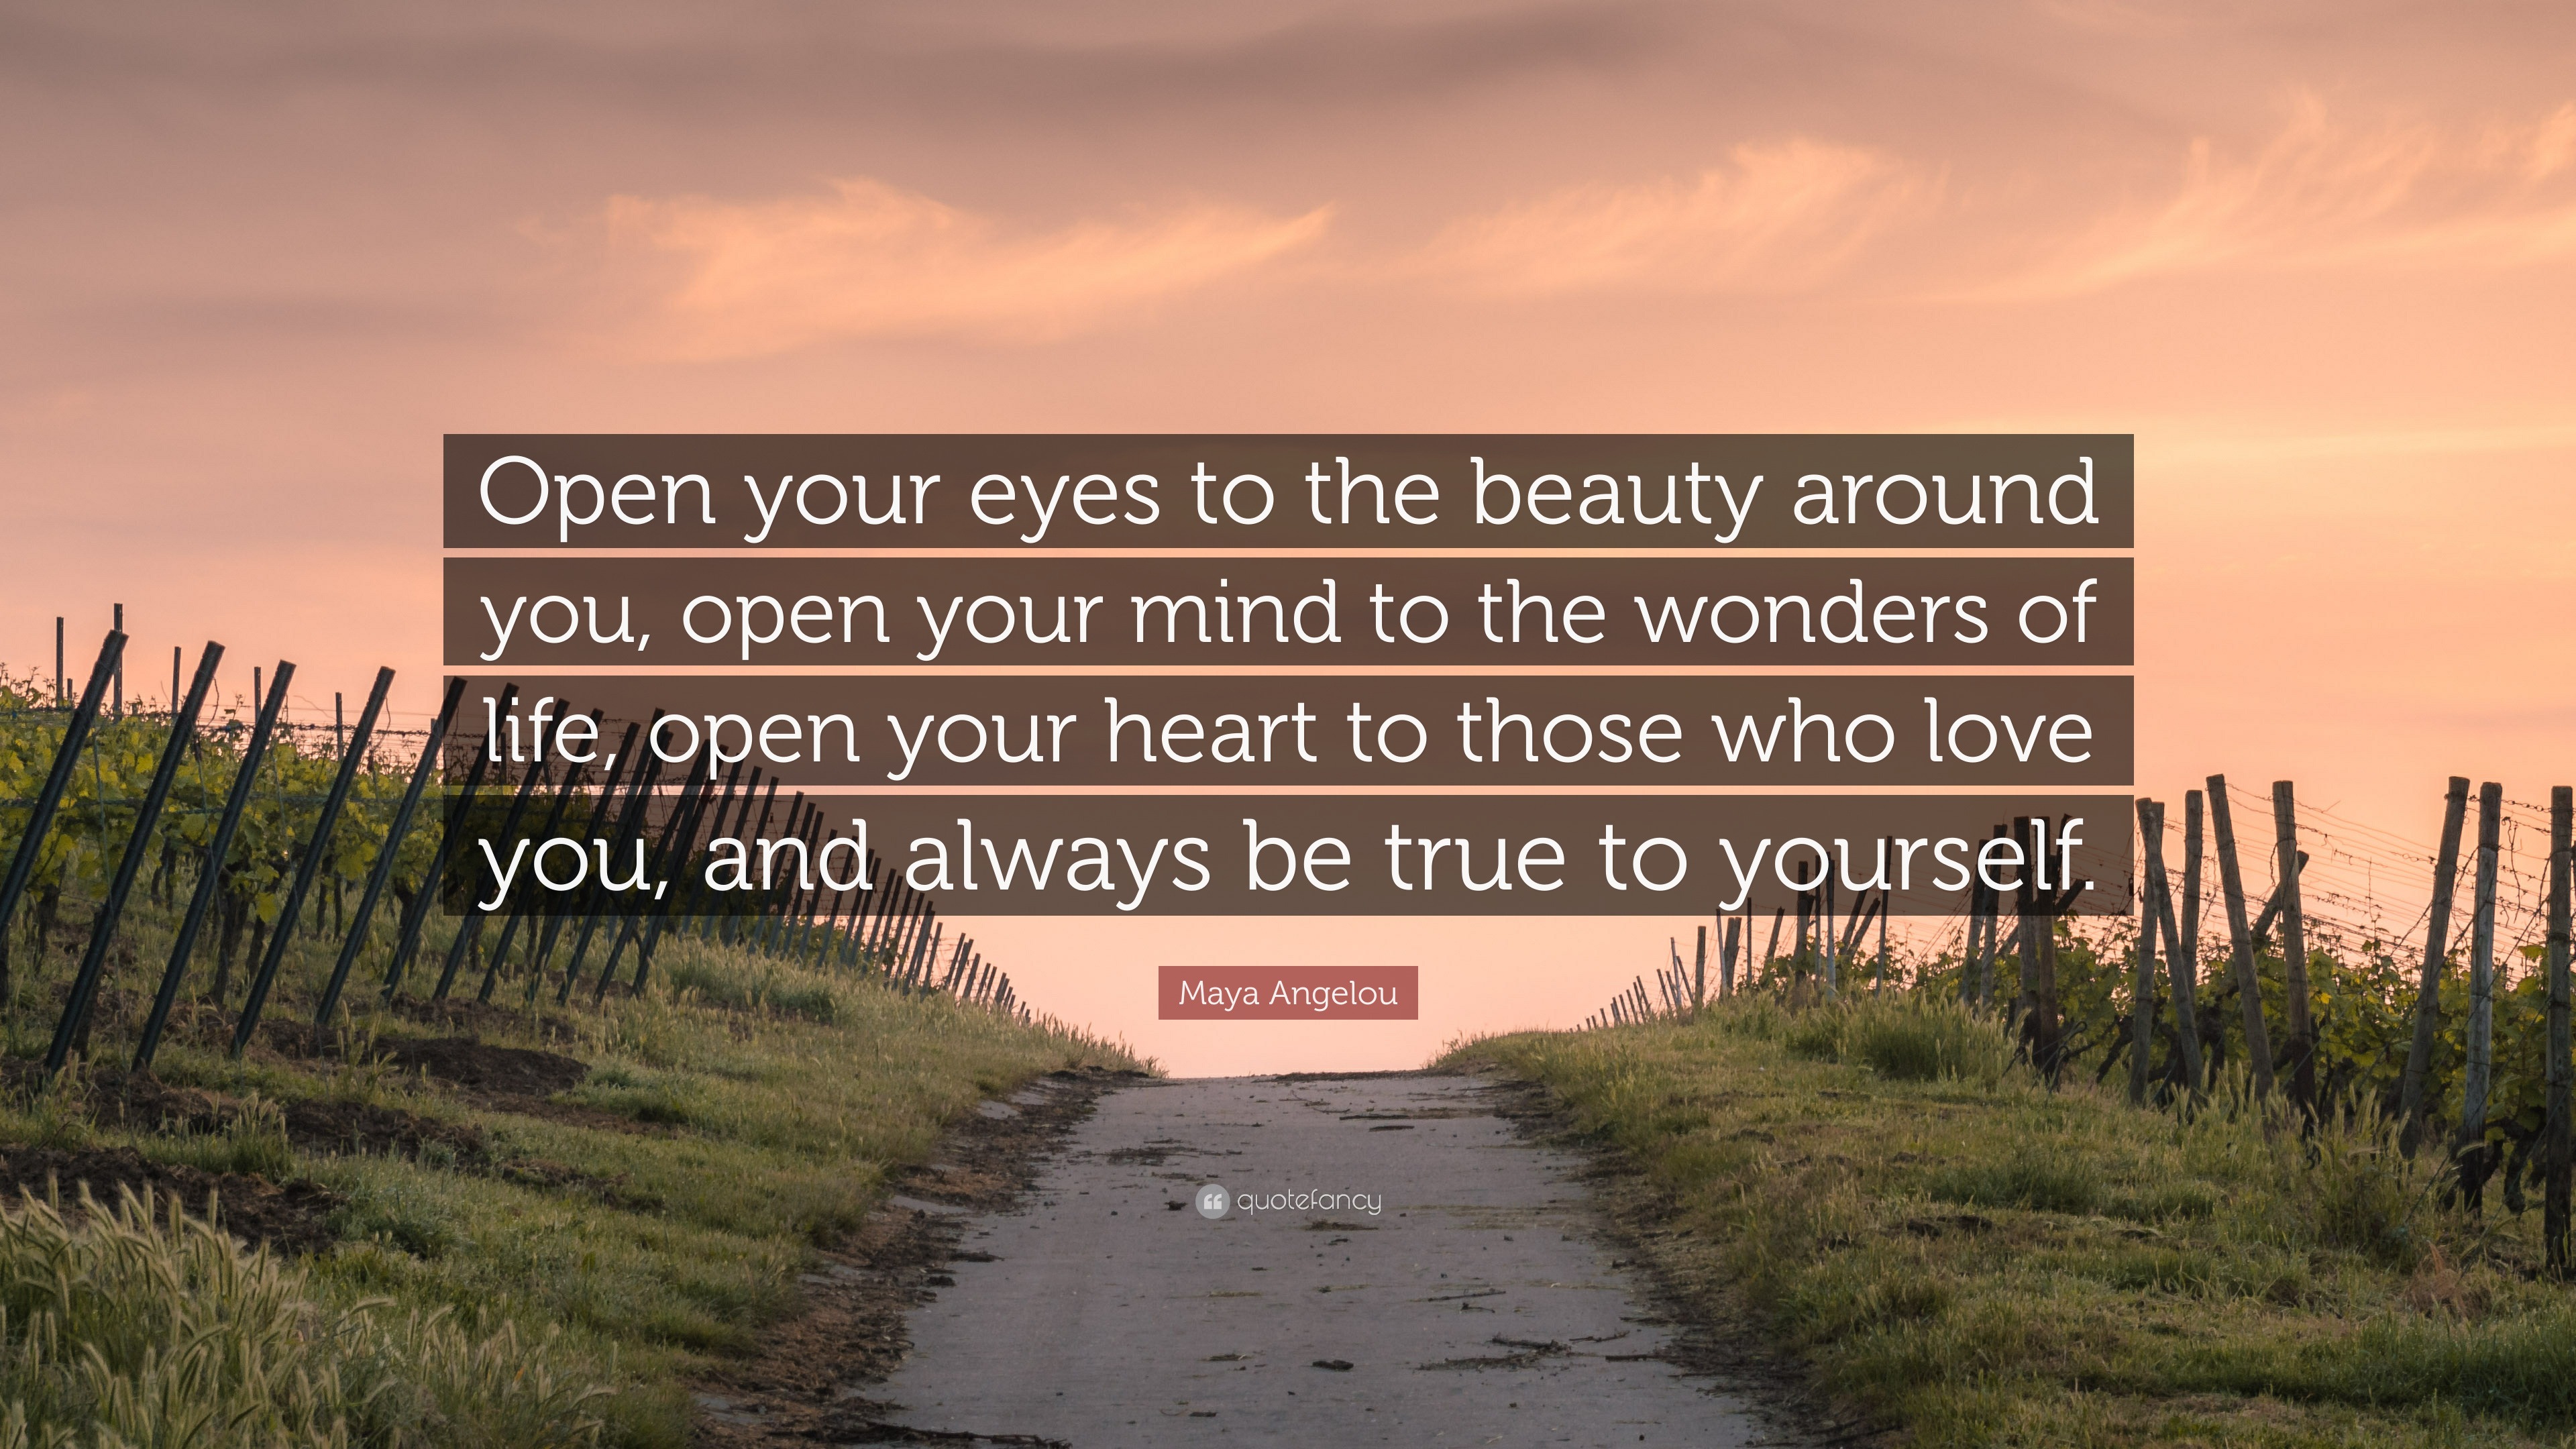 Maya Angelou Quote: “Open your eyes to the beauty around you, open your ...